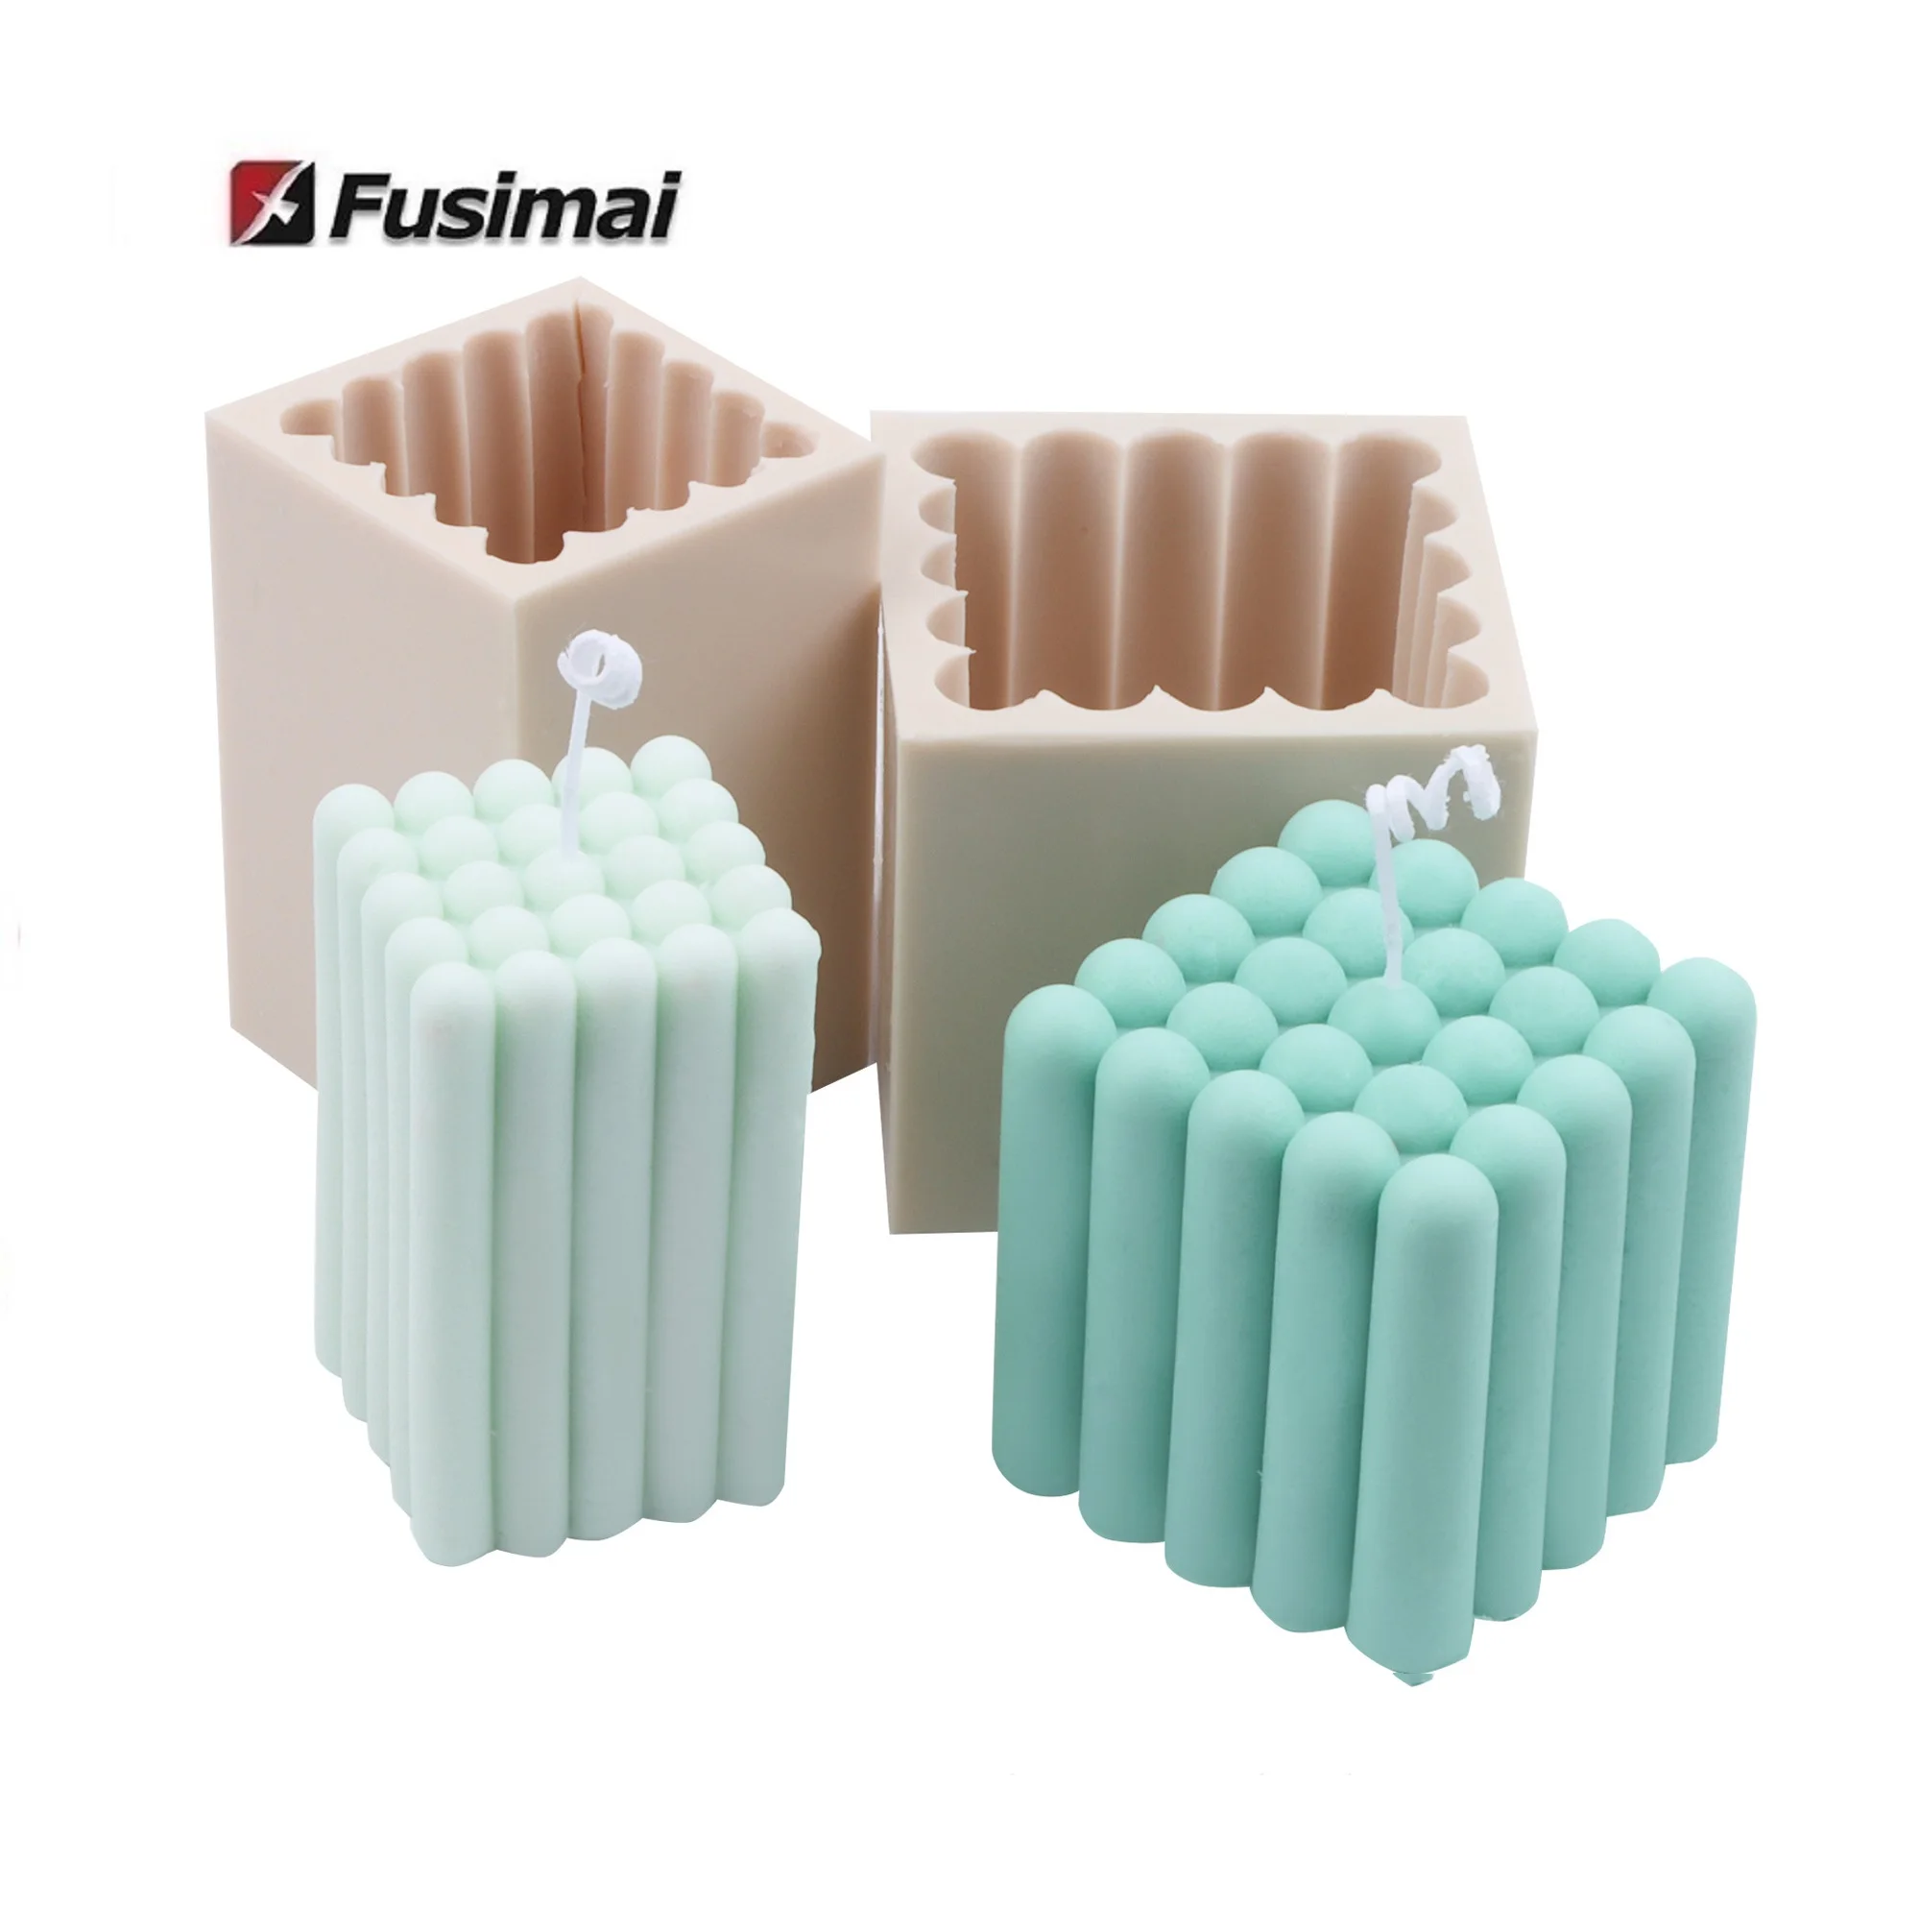 

Fusimai Cube Magic Ball Rubik's Cube Cube Scented Moulds New Square Cylindrical Finger Silicone Candle Molds, Customized color